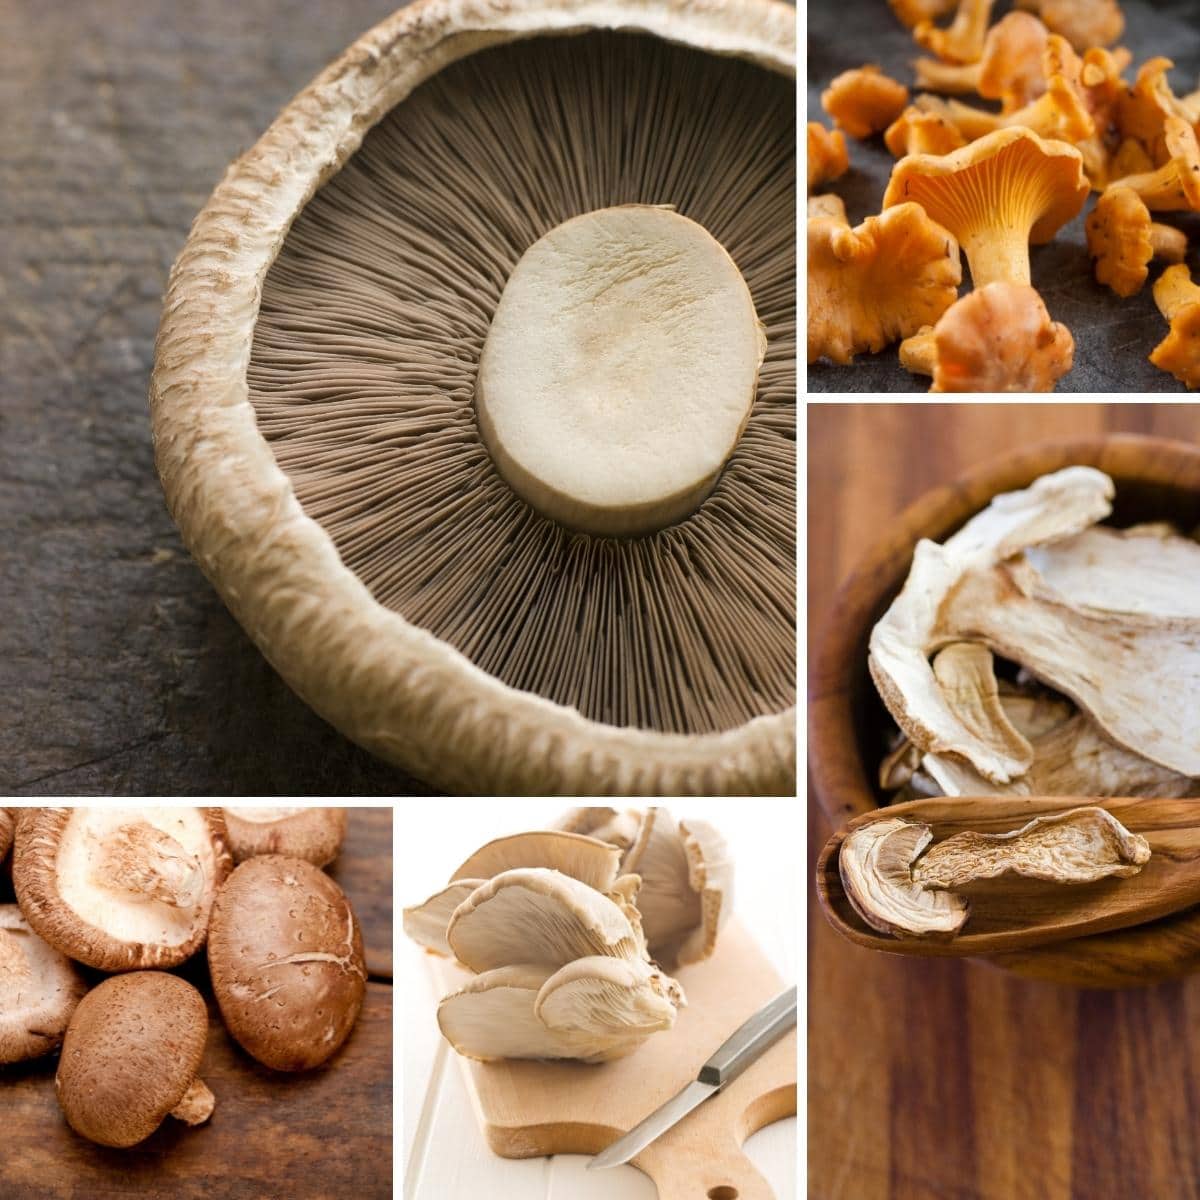 5 Best Mushrooms for Risotto